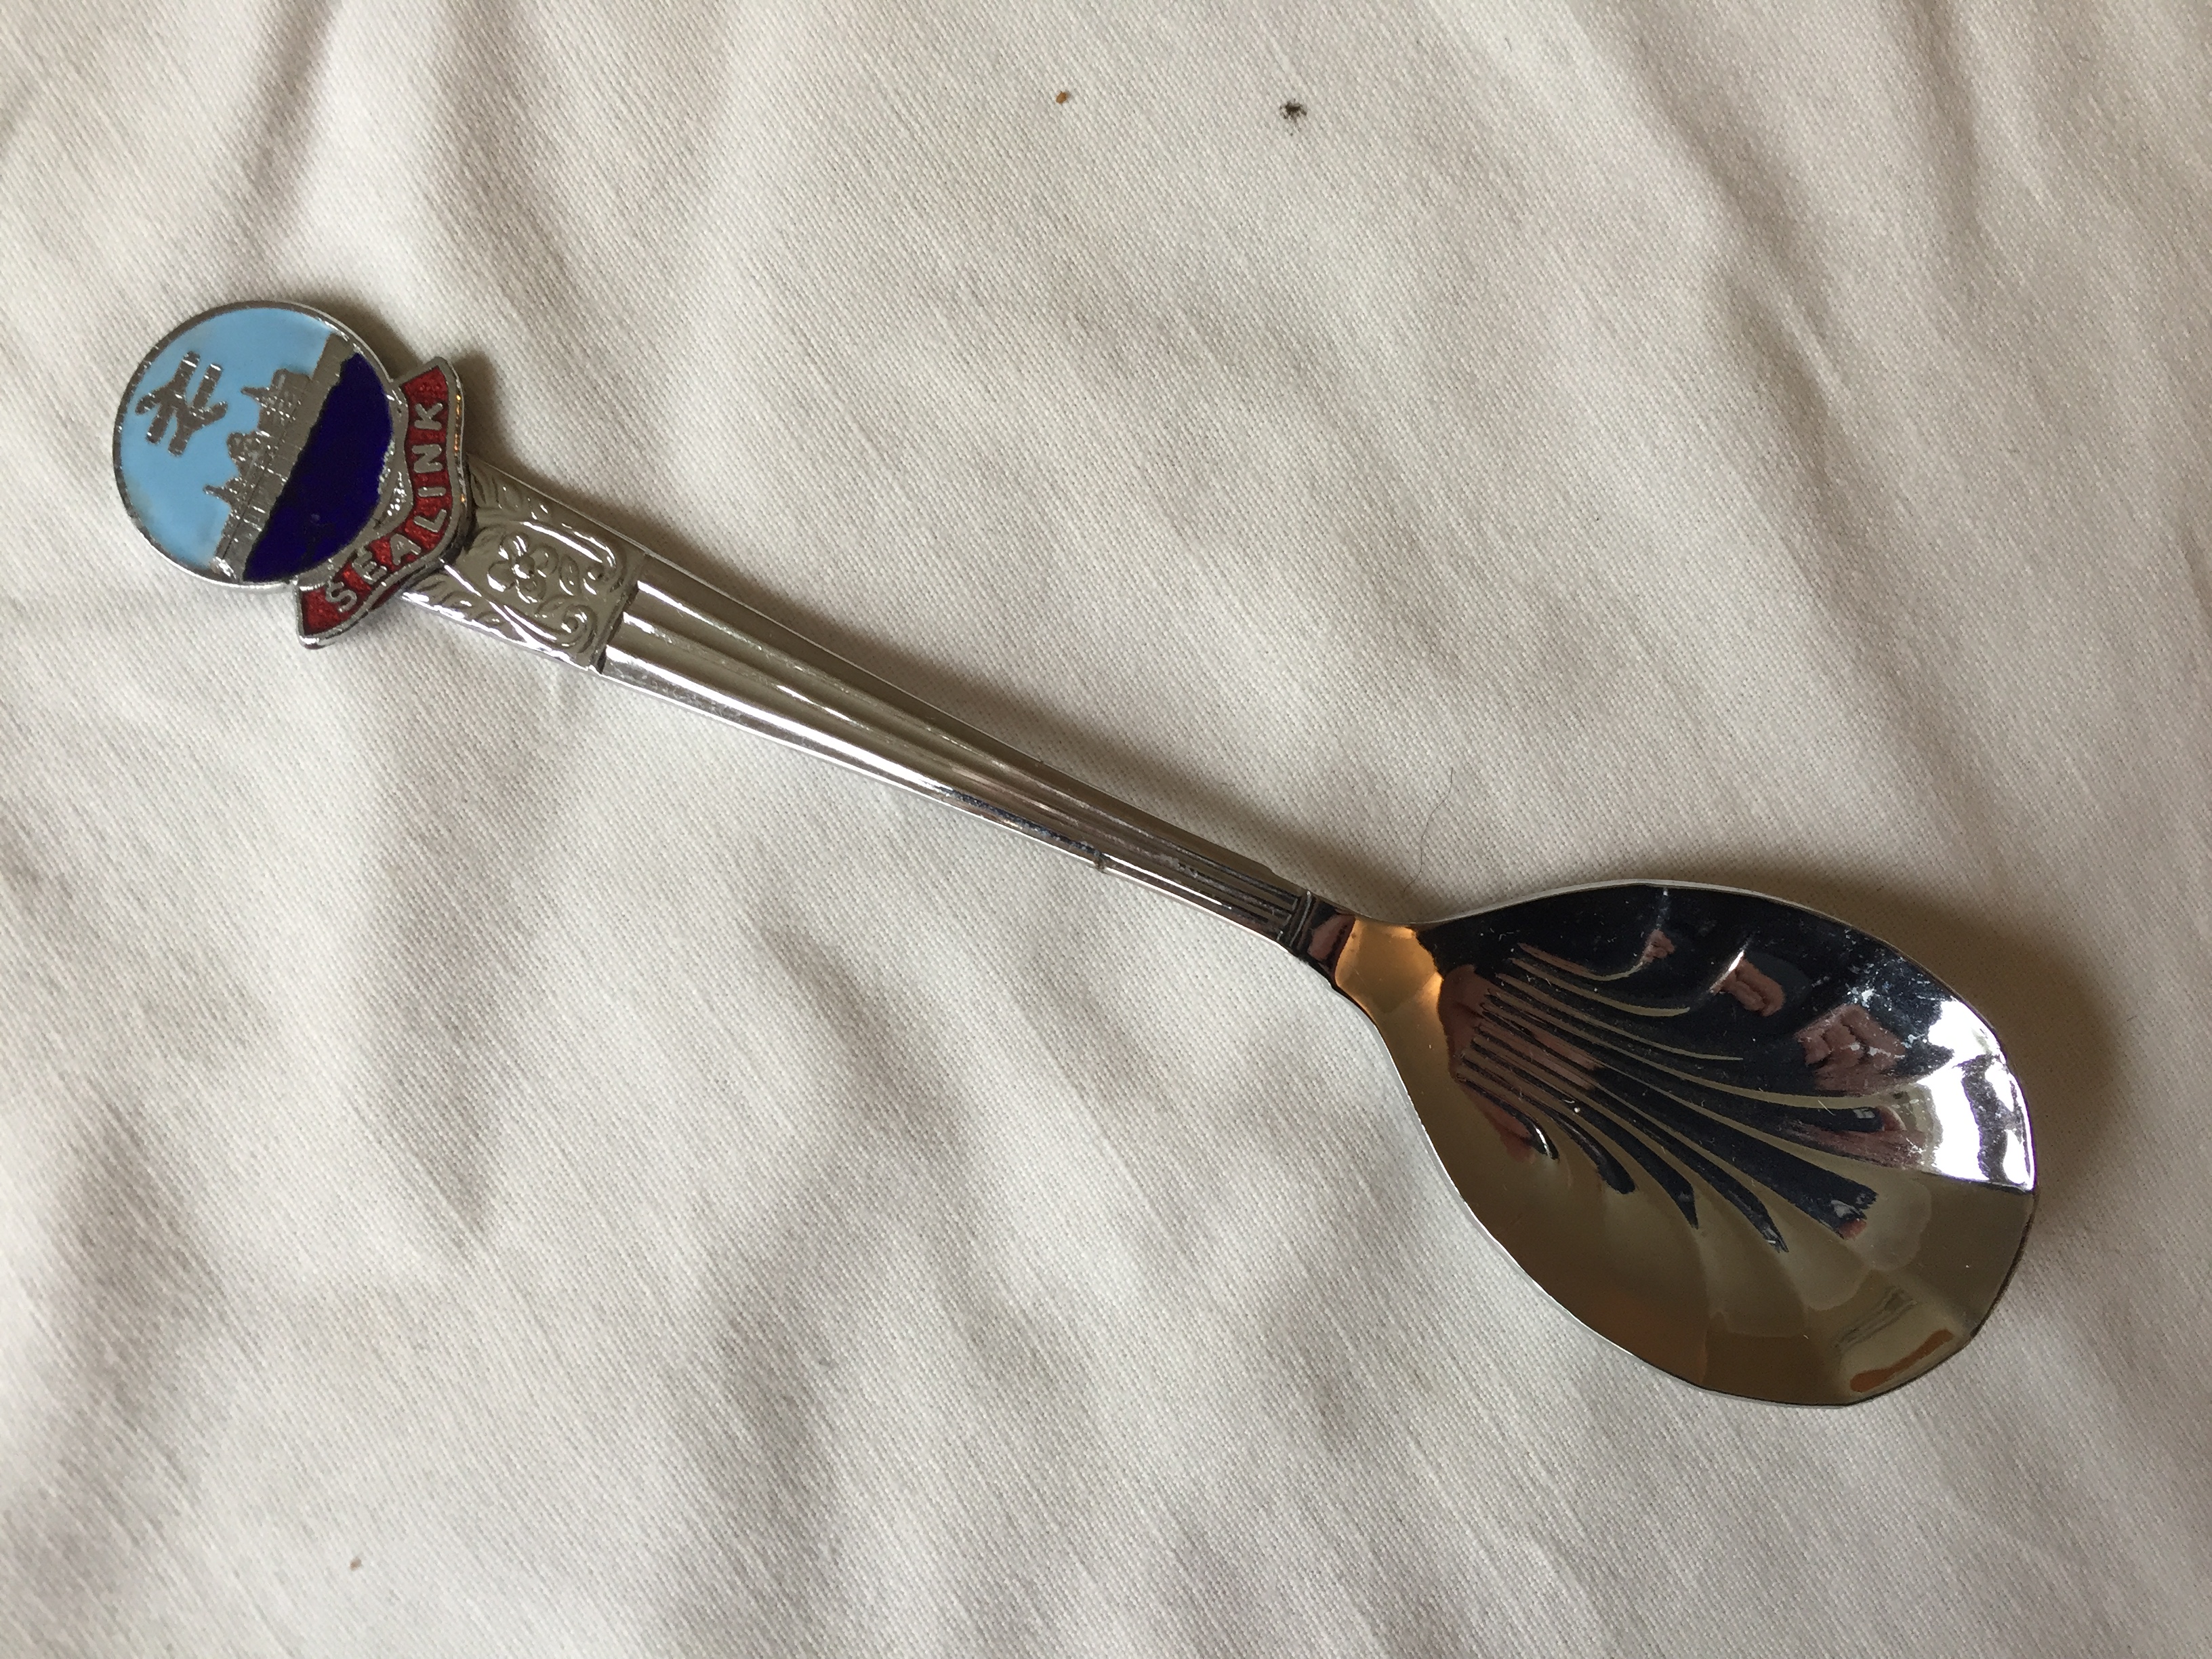 SOUVENIR SPOON FROM THE SEALINK FERRY CROSSING SERVICE